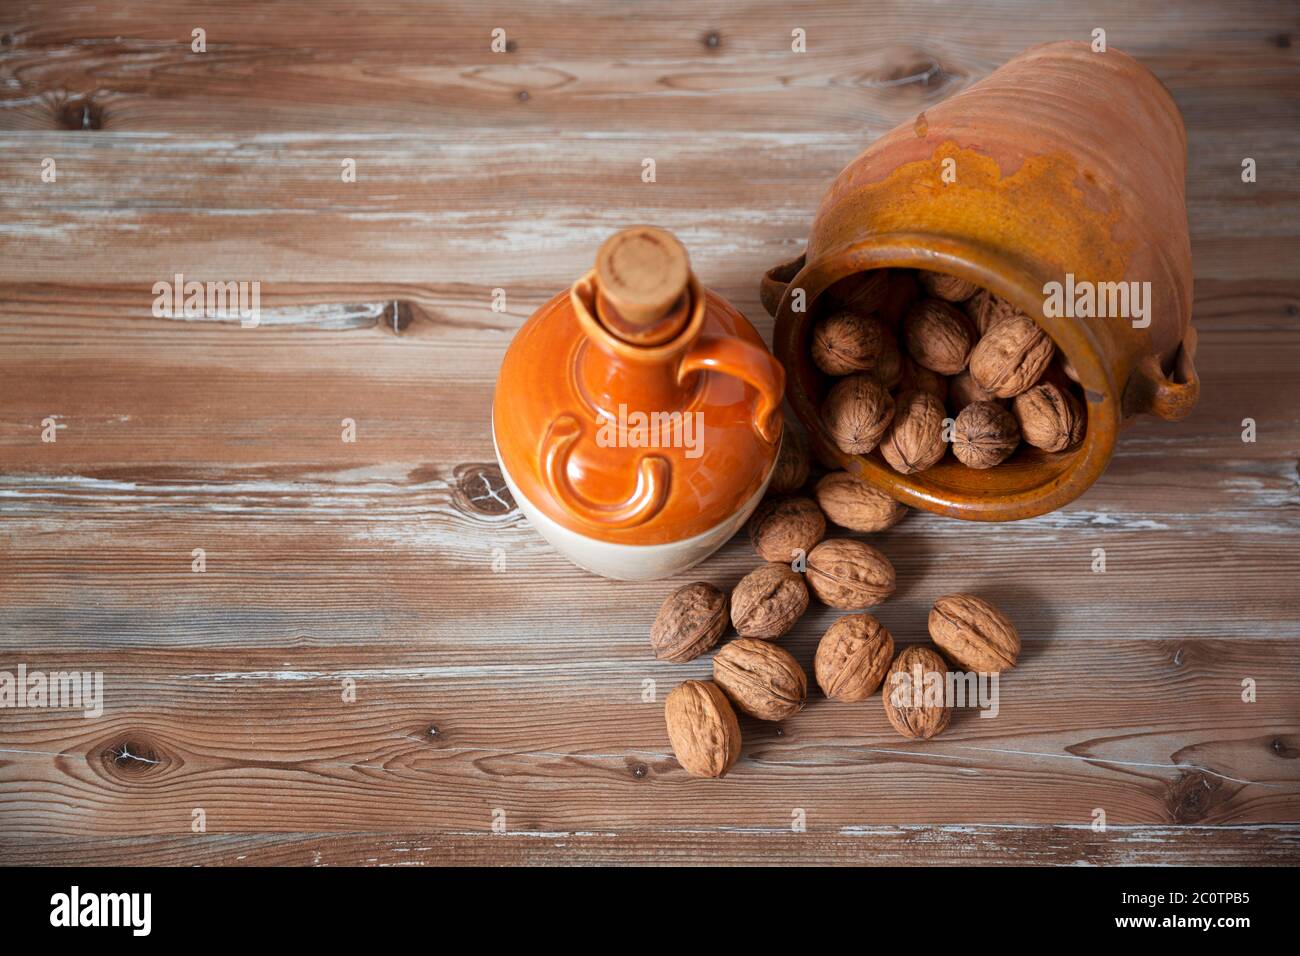 Clay vessel with nuts scattered on aged wooden board. Space for text. Healthy food concept. Stock Photo